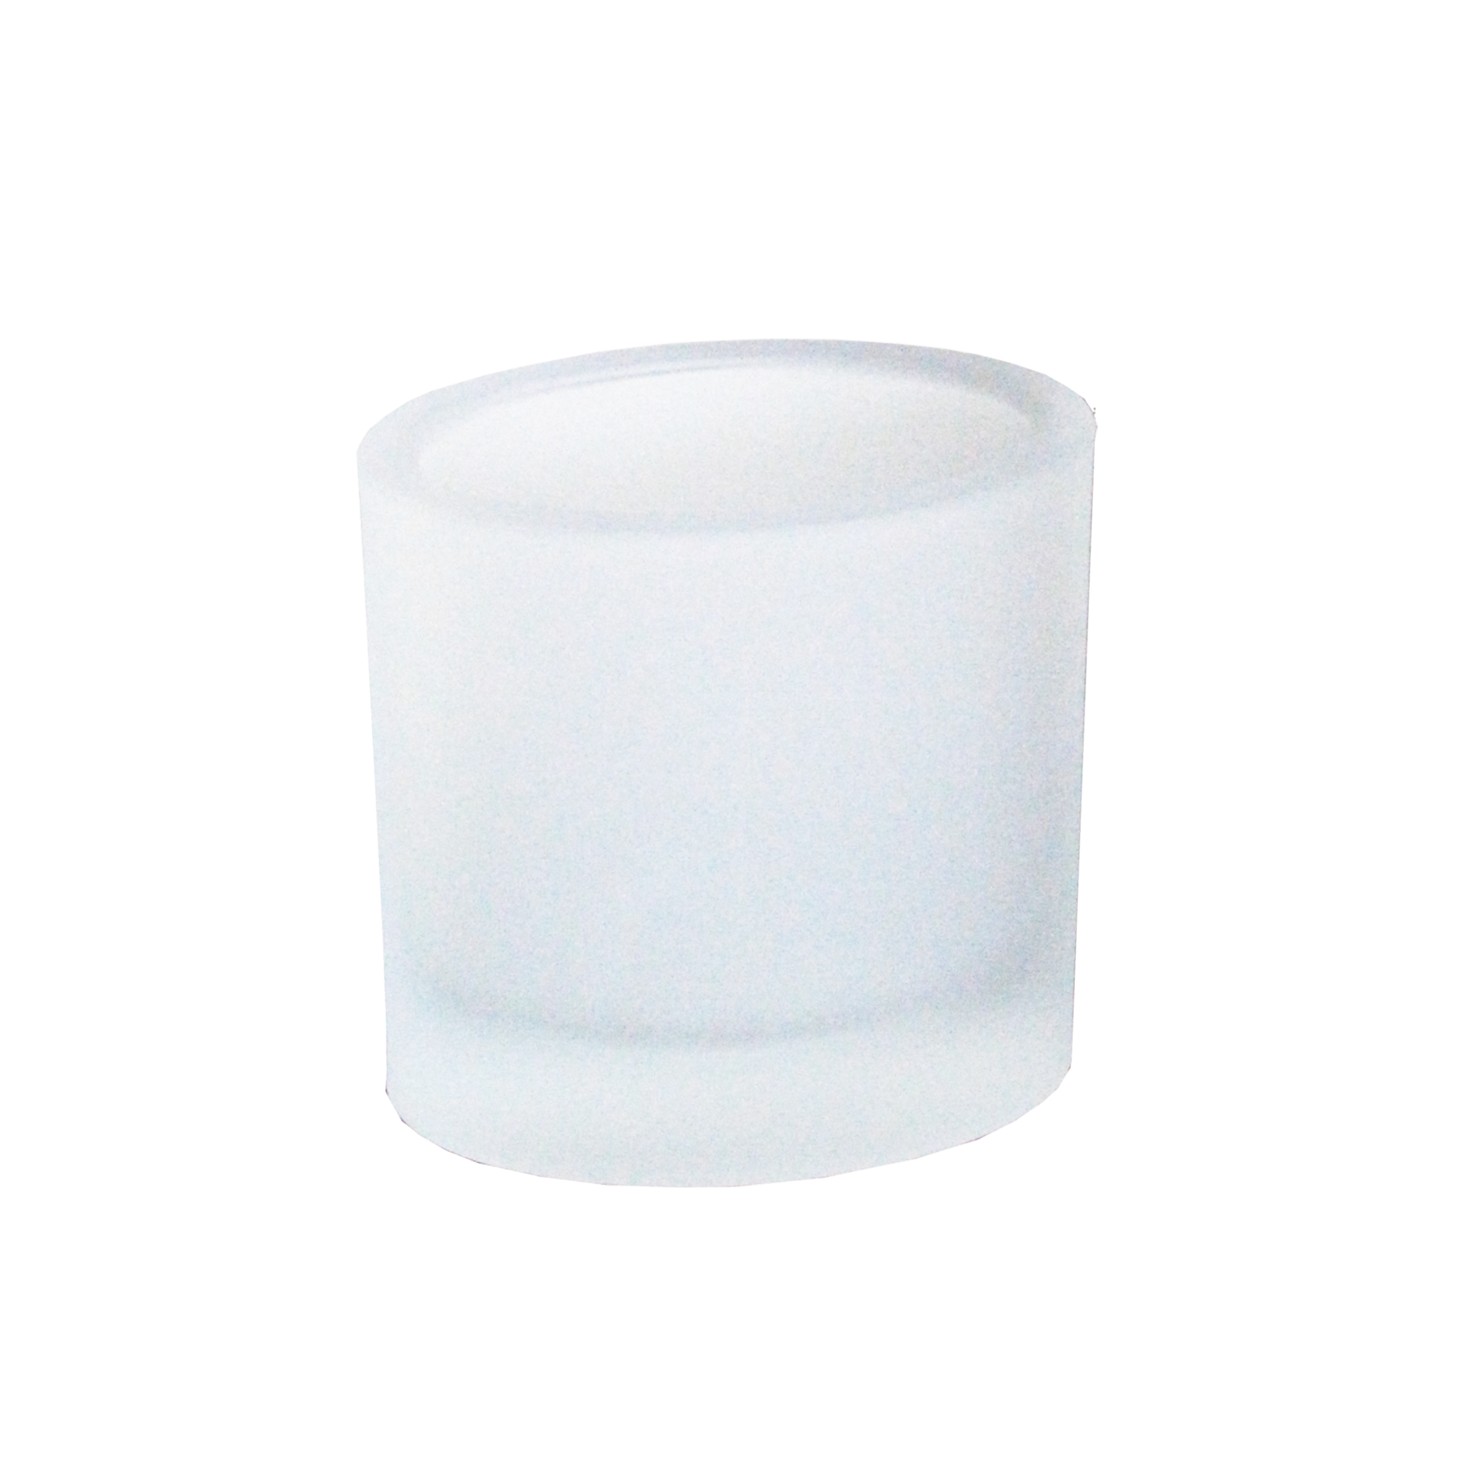 Toothbrush glass - oval shape in satin glass